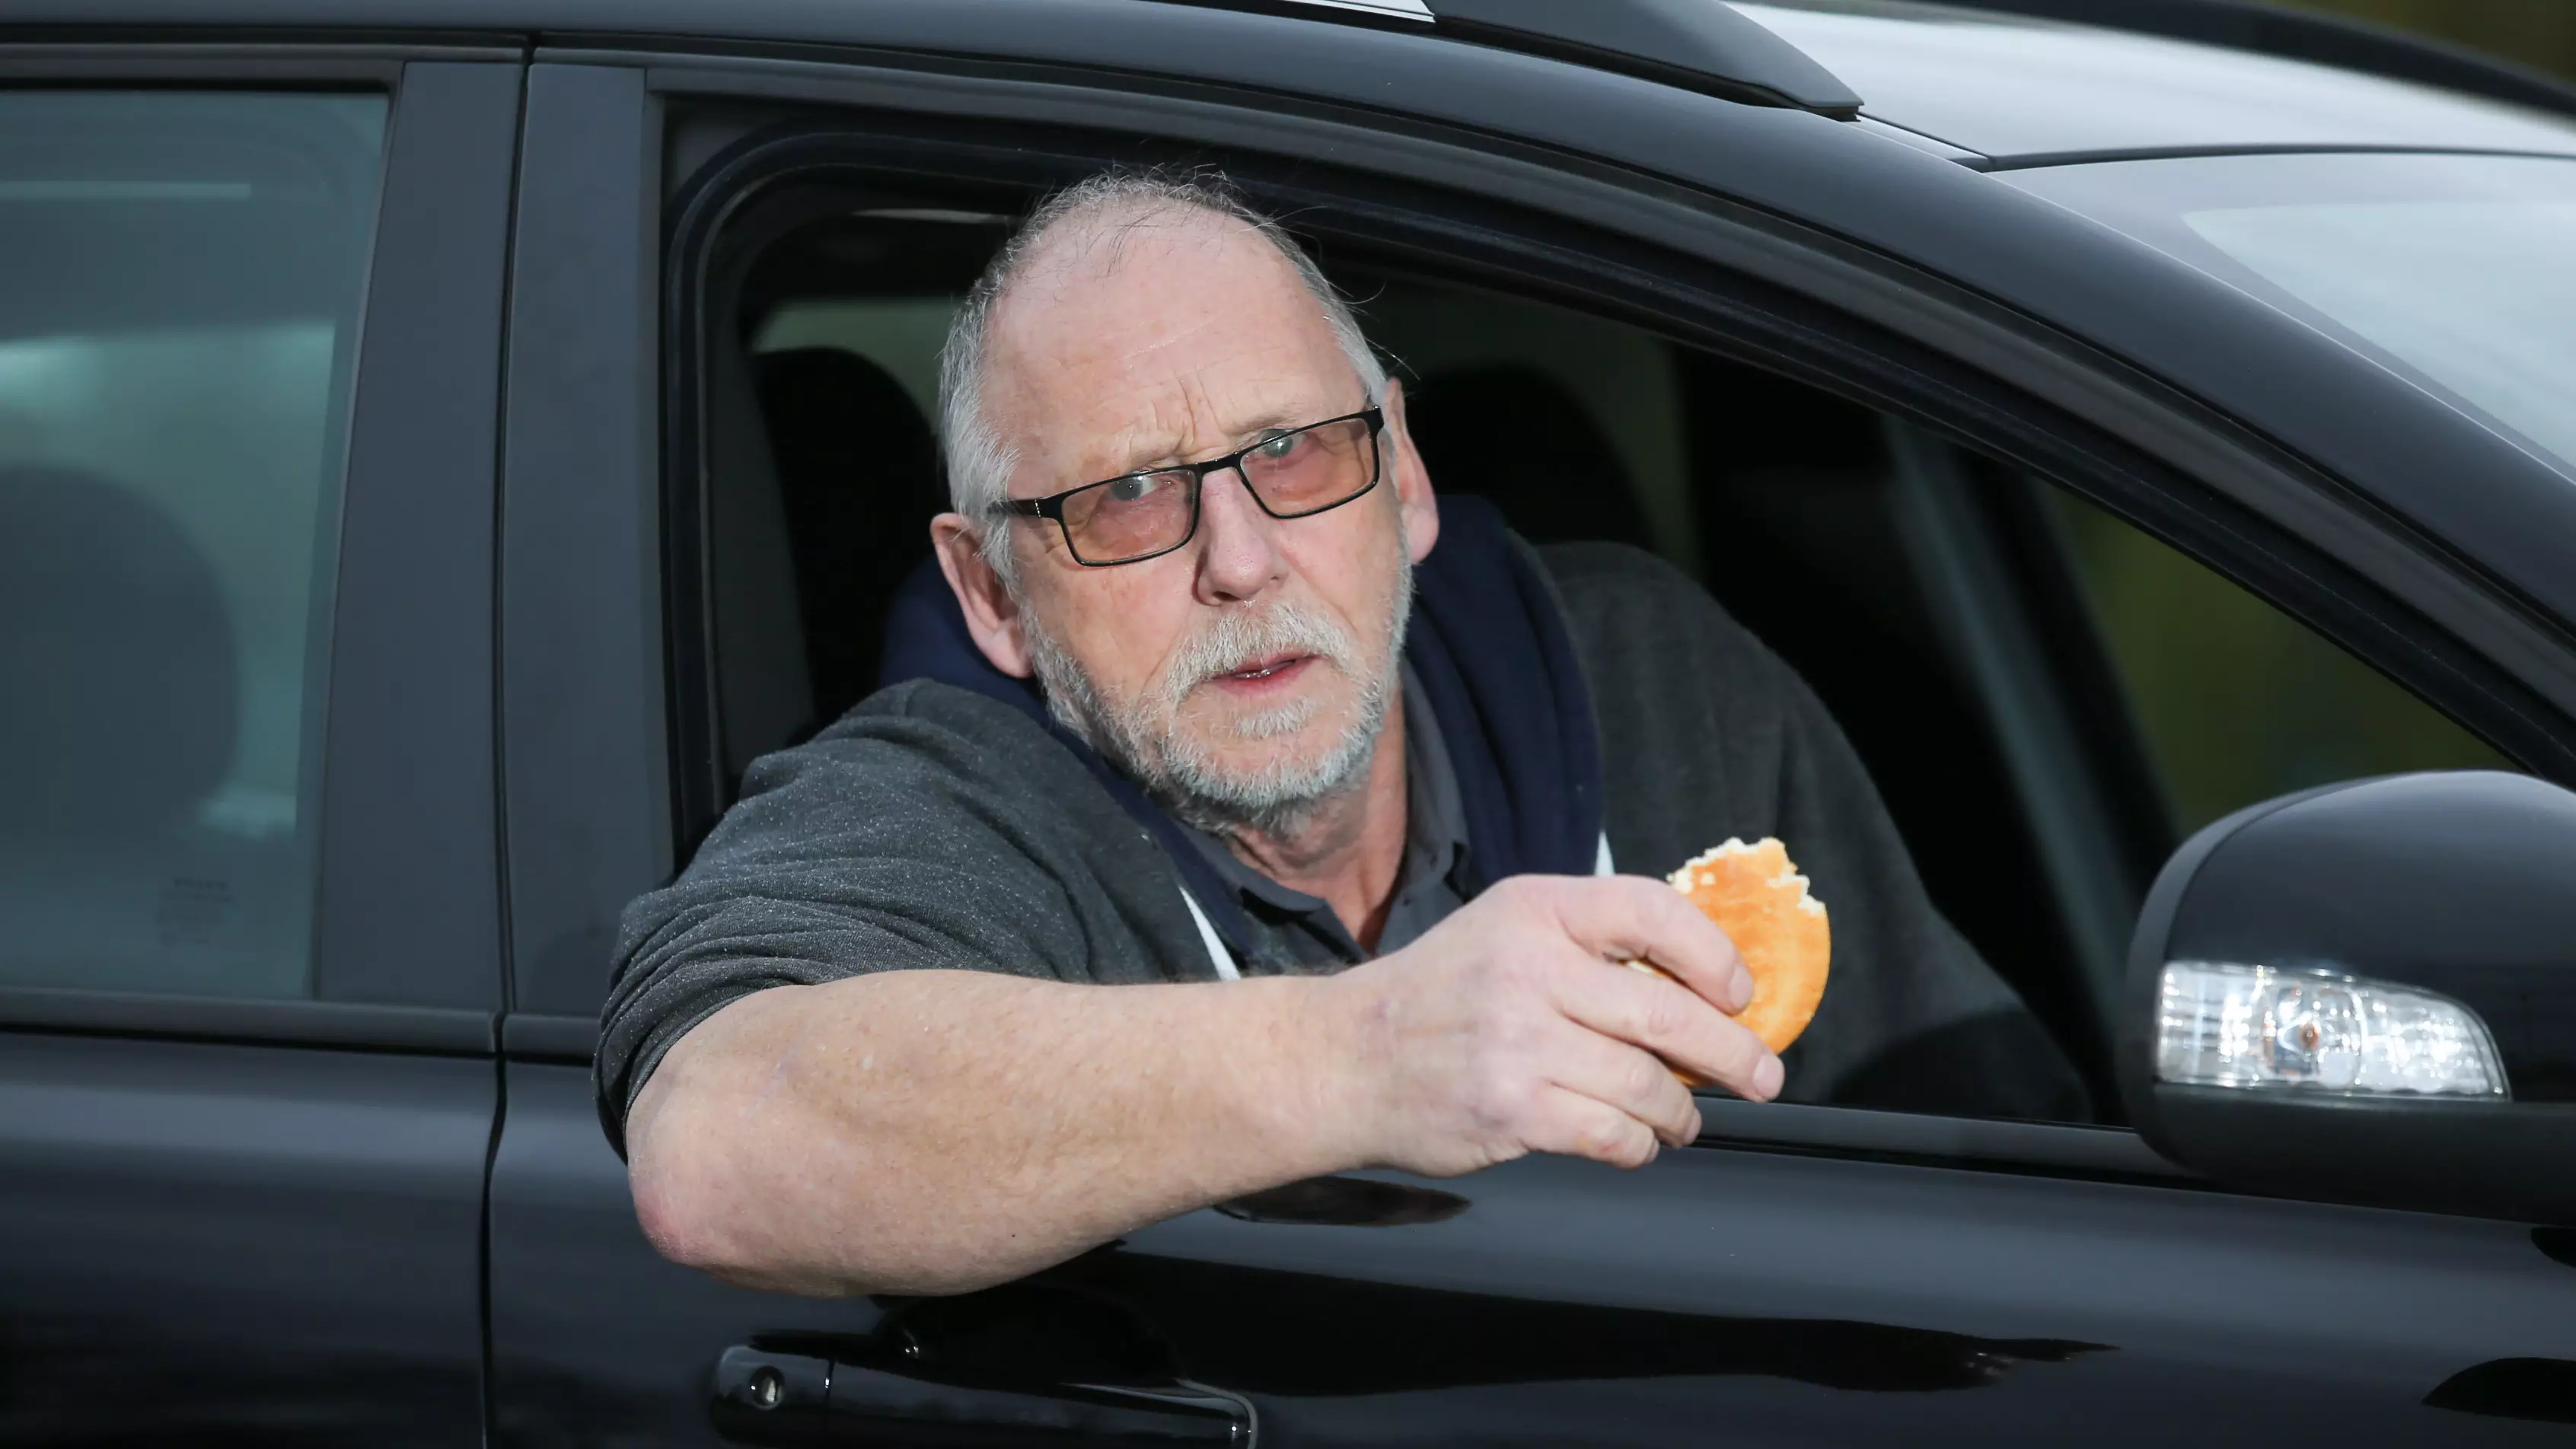 Man Fined £50 For 'Feeding Birds Two Tiny Bits Of McDonald's McMuffin'